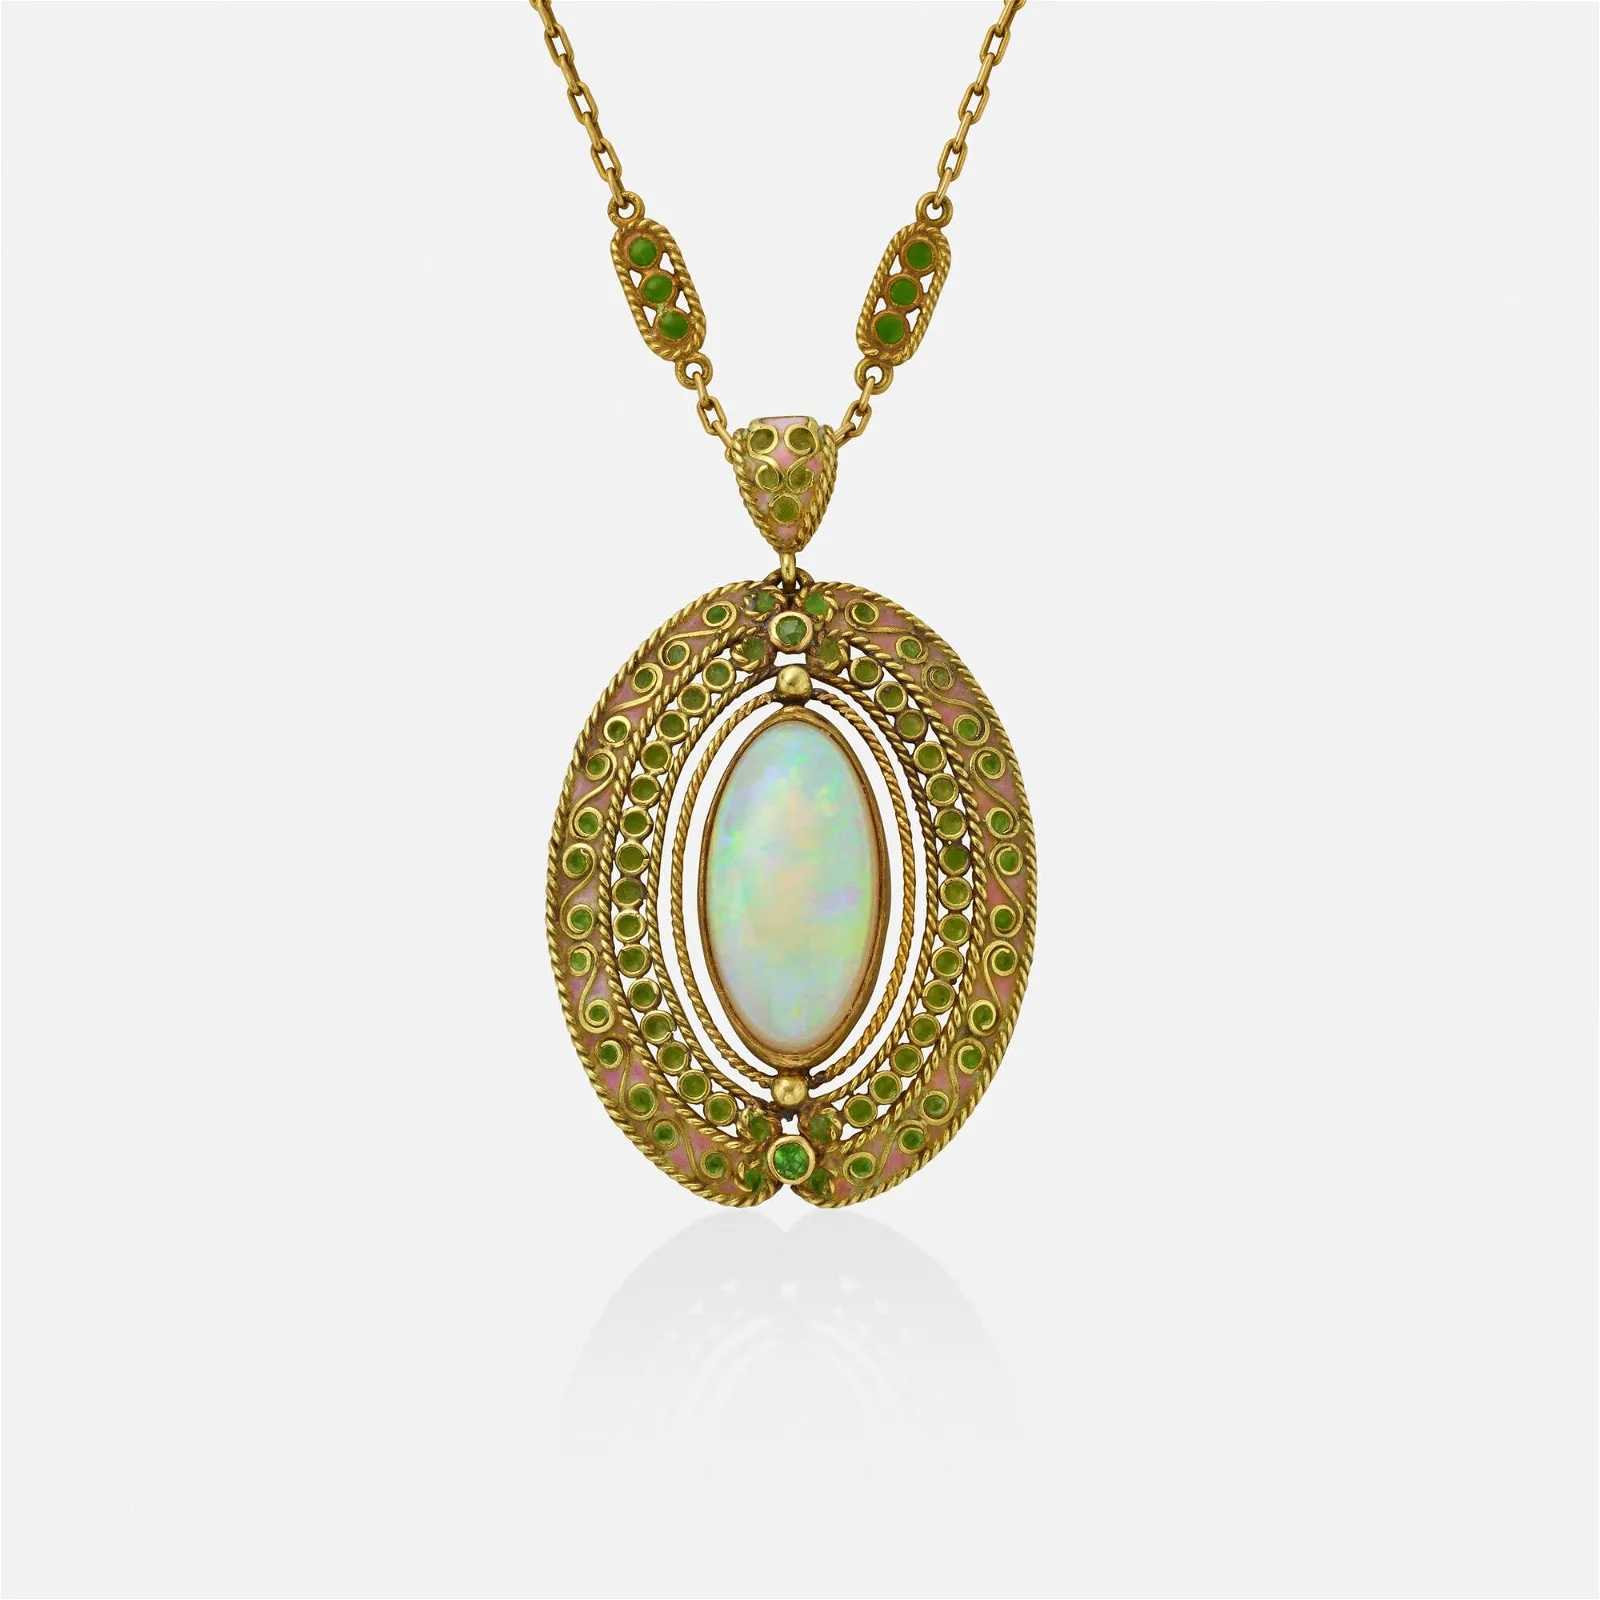 Tiffany pendant necklace is the star at Toomey April 16